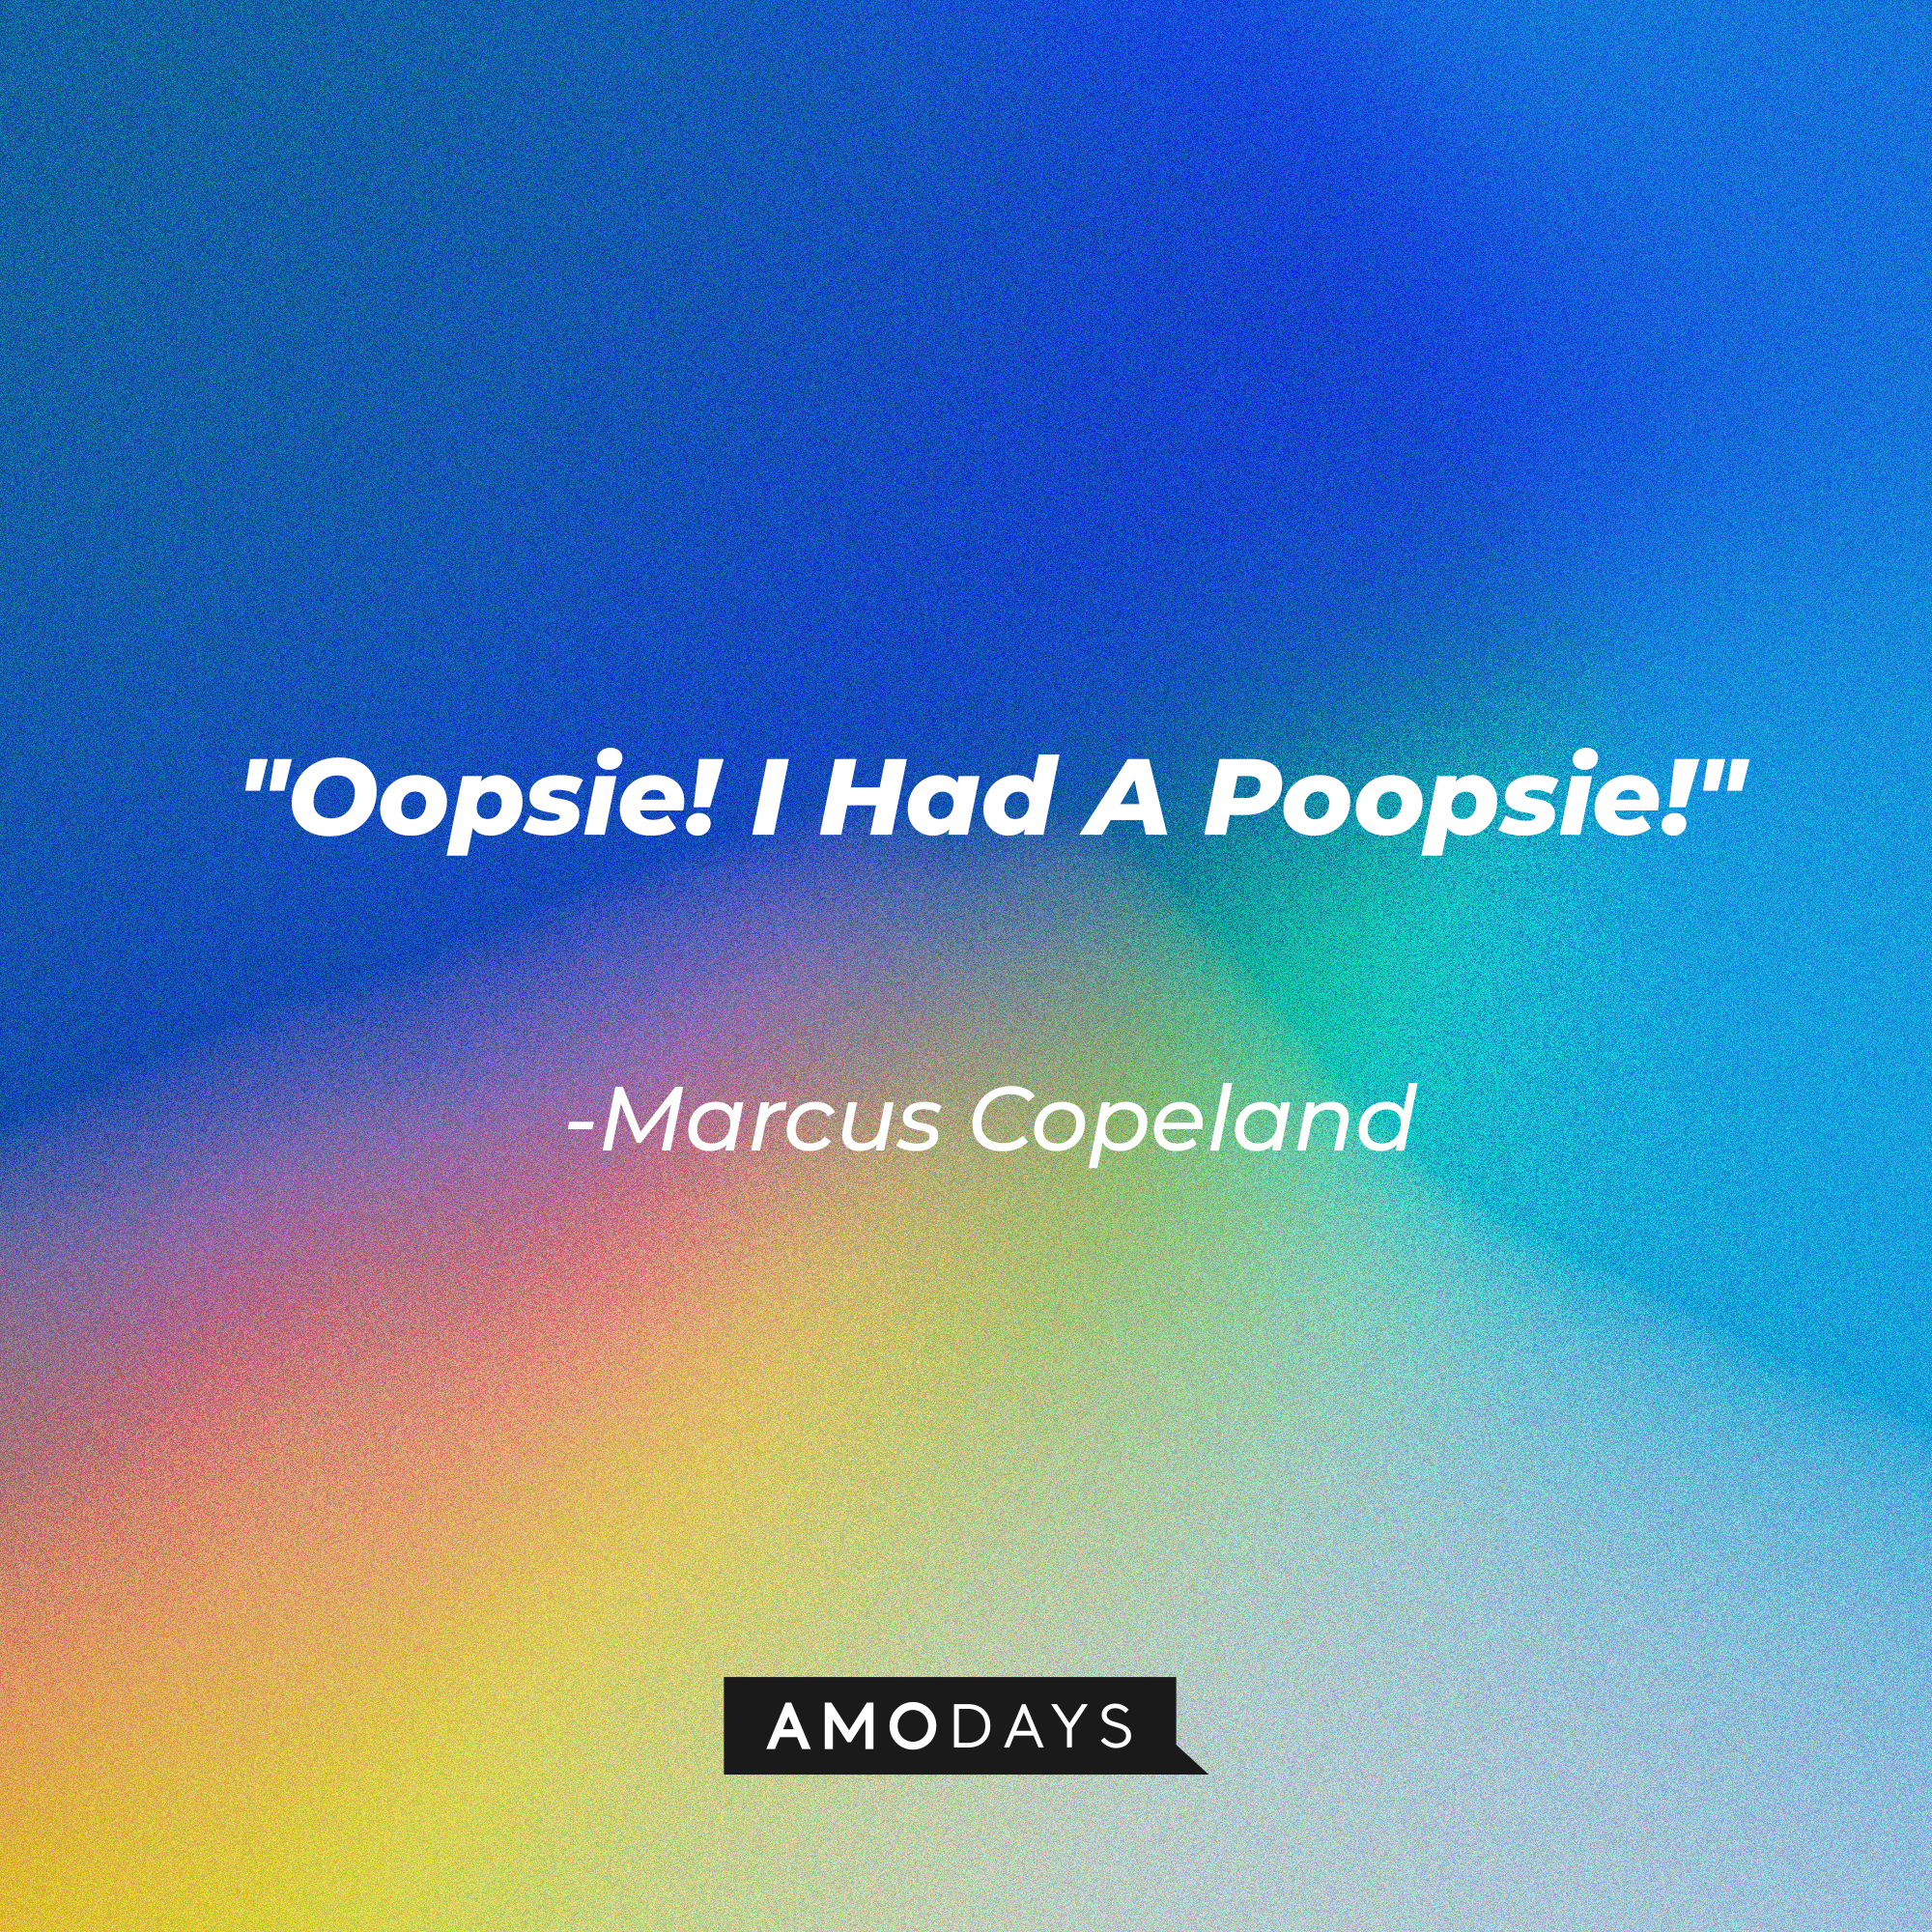 Marcus Copeland's quote: "Oopsie! I Had A Poopsie!" | Source: Amodays